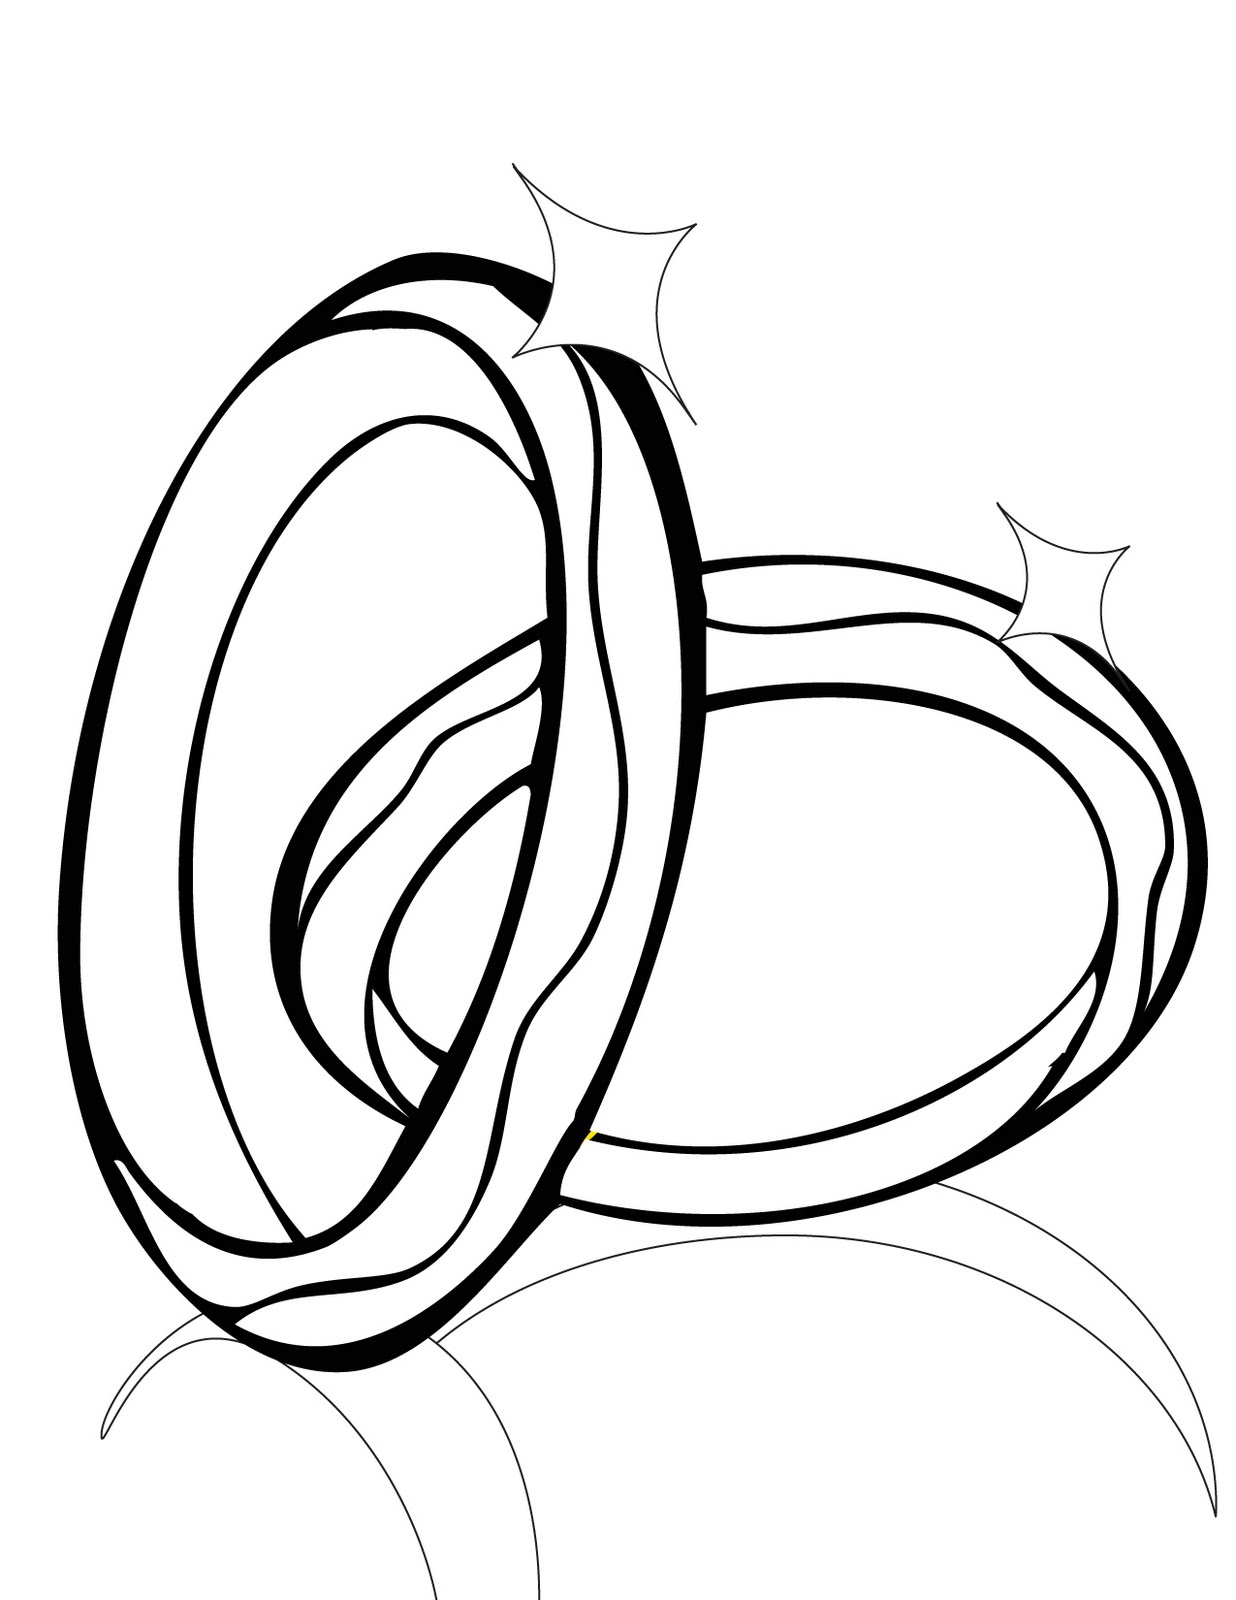 Diamond Ring Coloring Pages - ClipArt Best - ClipArt Best - ClipArt Best